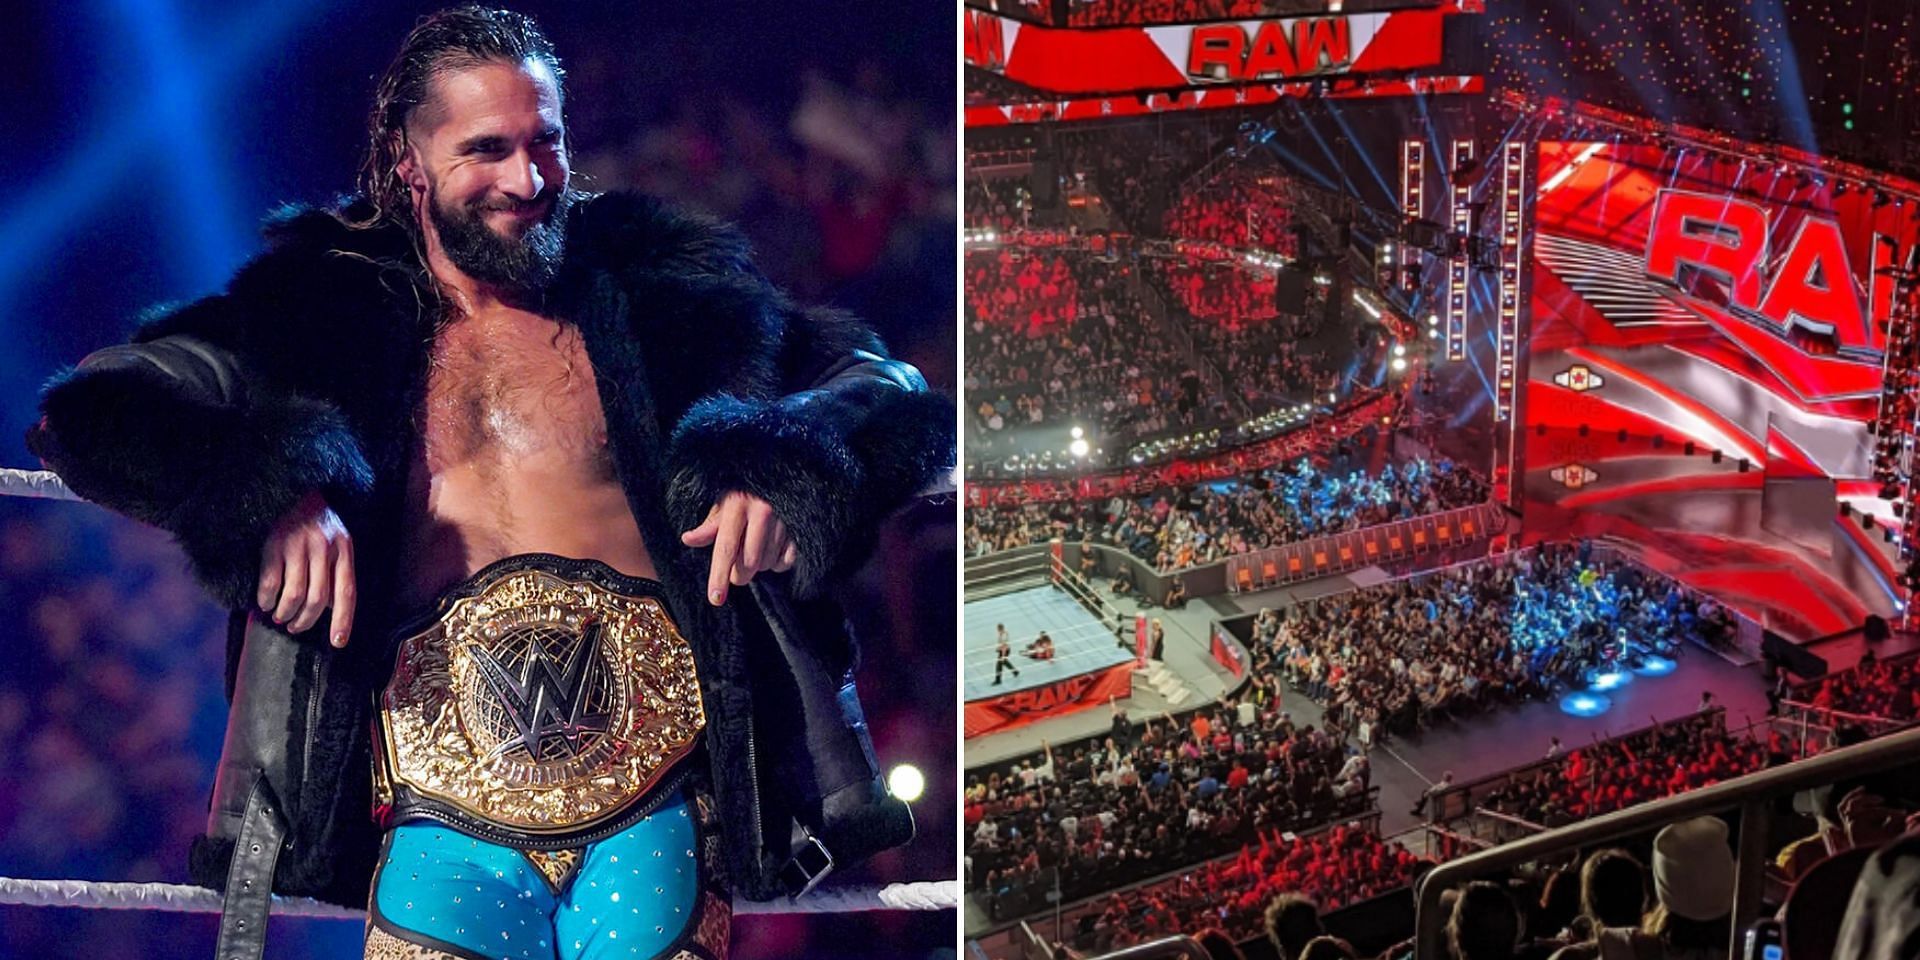 Seth Rollins has commented on this RAW star